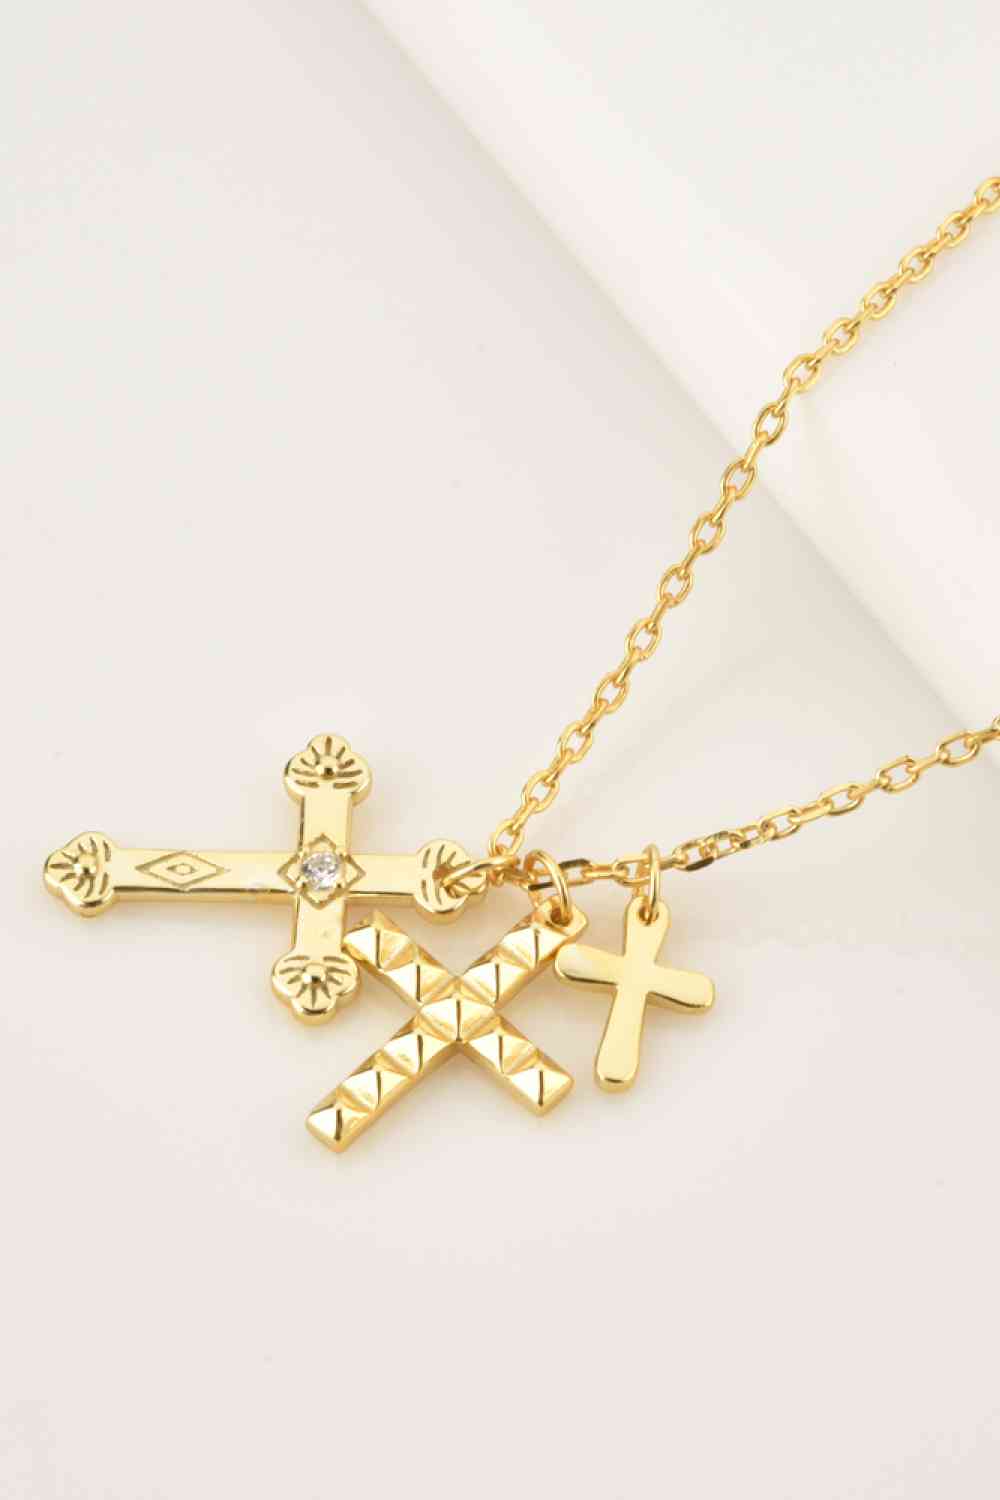 Inlaid Zircon Cross Pendant 925 Sterling Silver Necklace